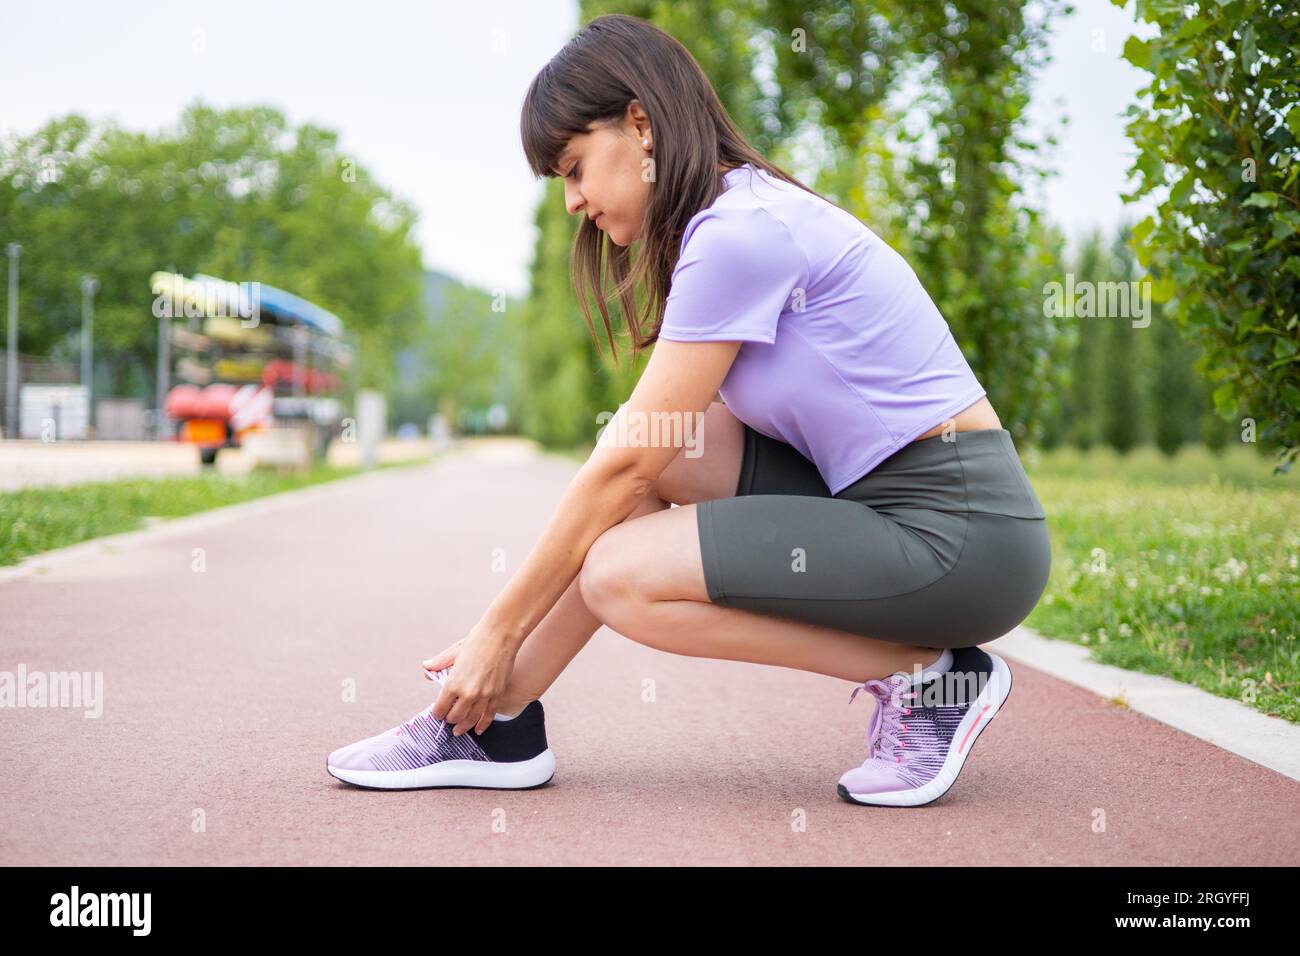 Female athlete tying running shoe laces for running workout. Fitness training outdoors. Exercise and active lifestyle. Stock Photo